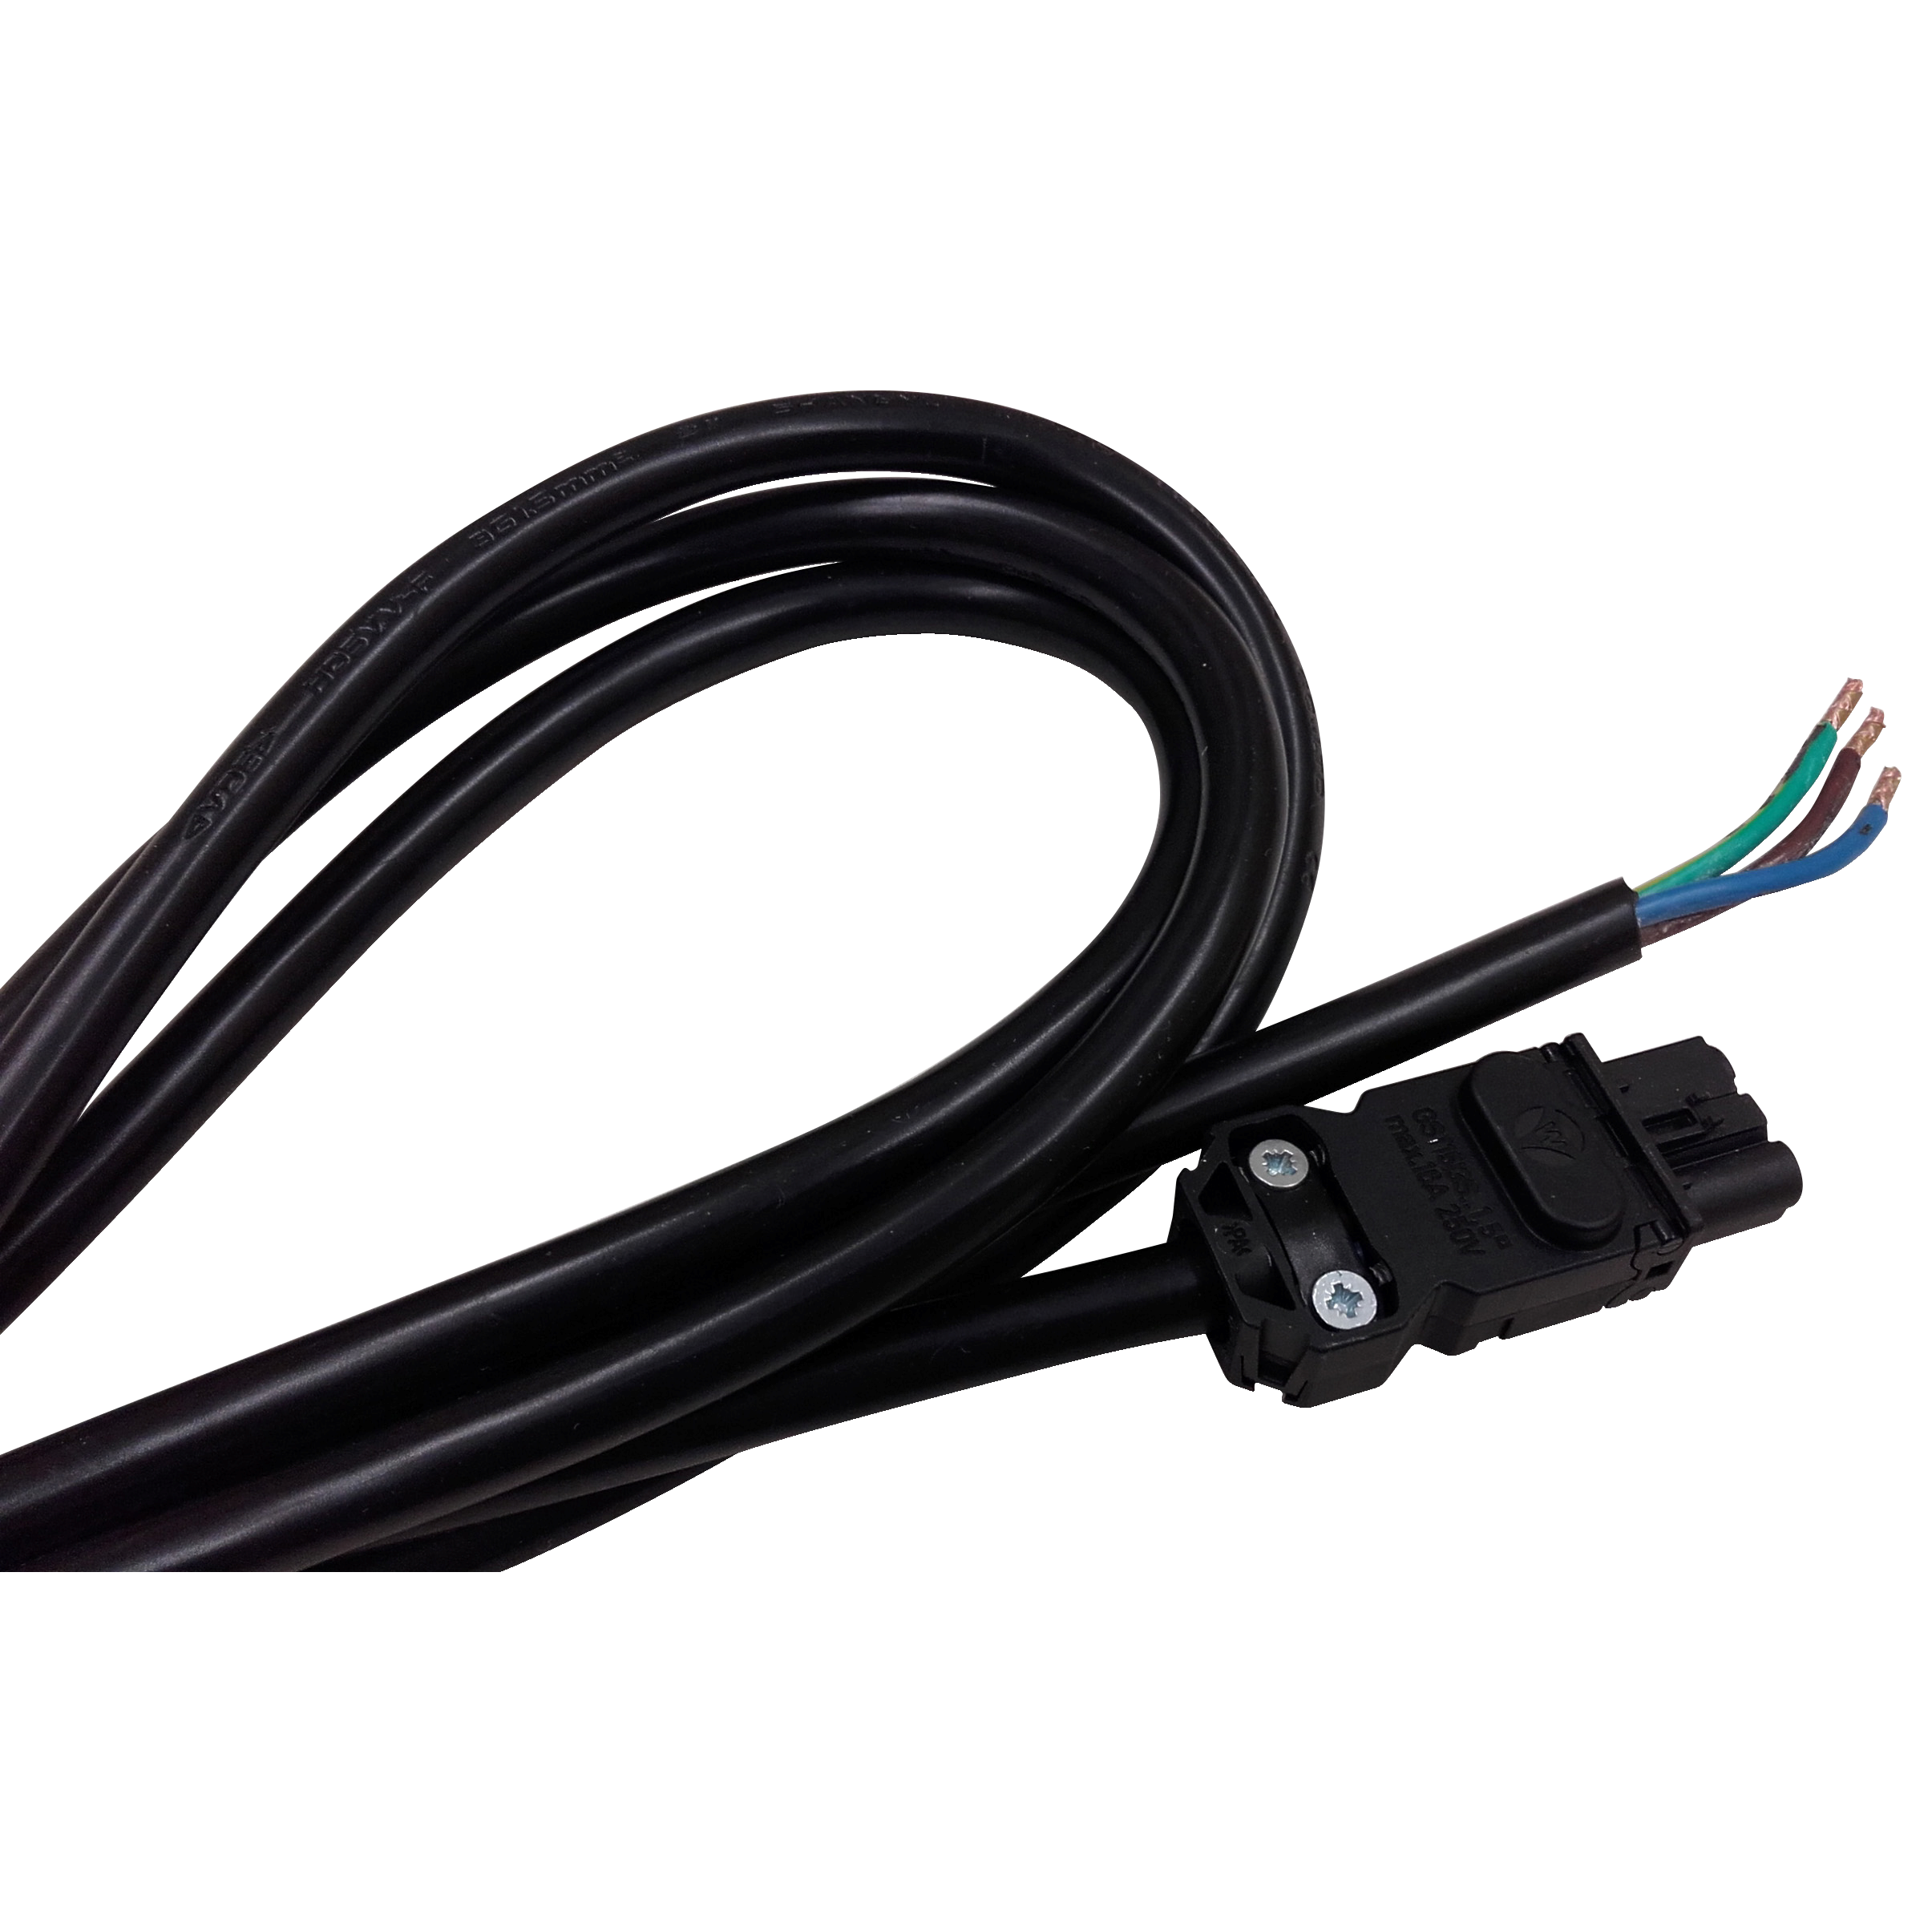 Power cable 3m long for IEC Multi-fixing LED lamps